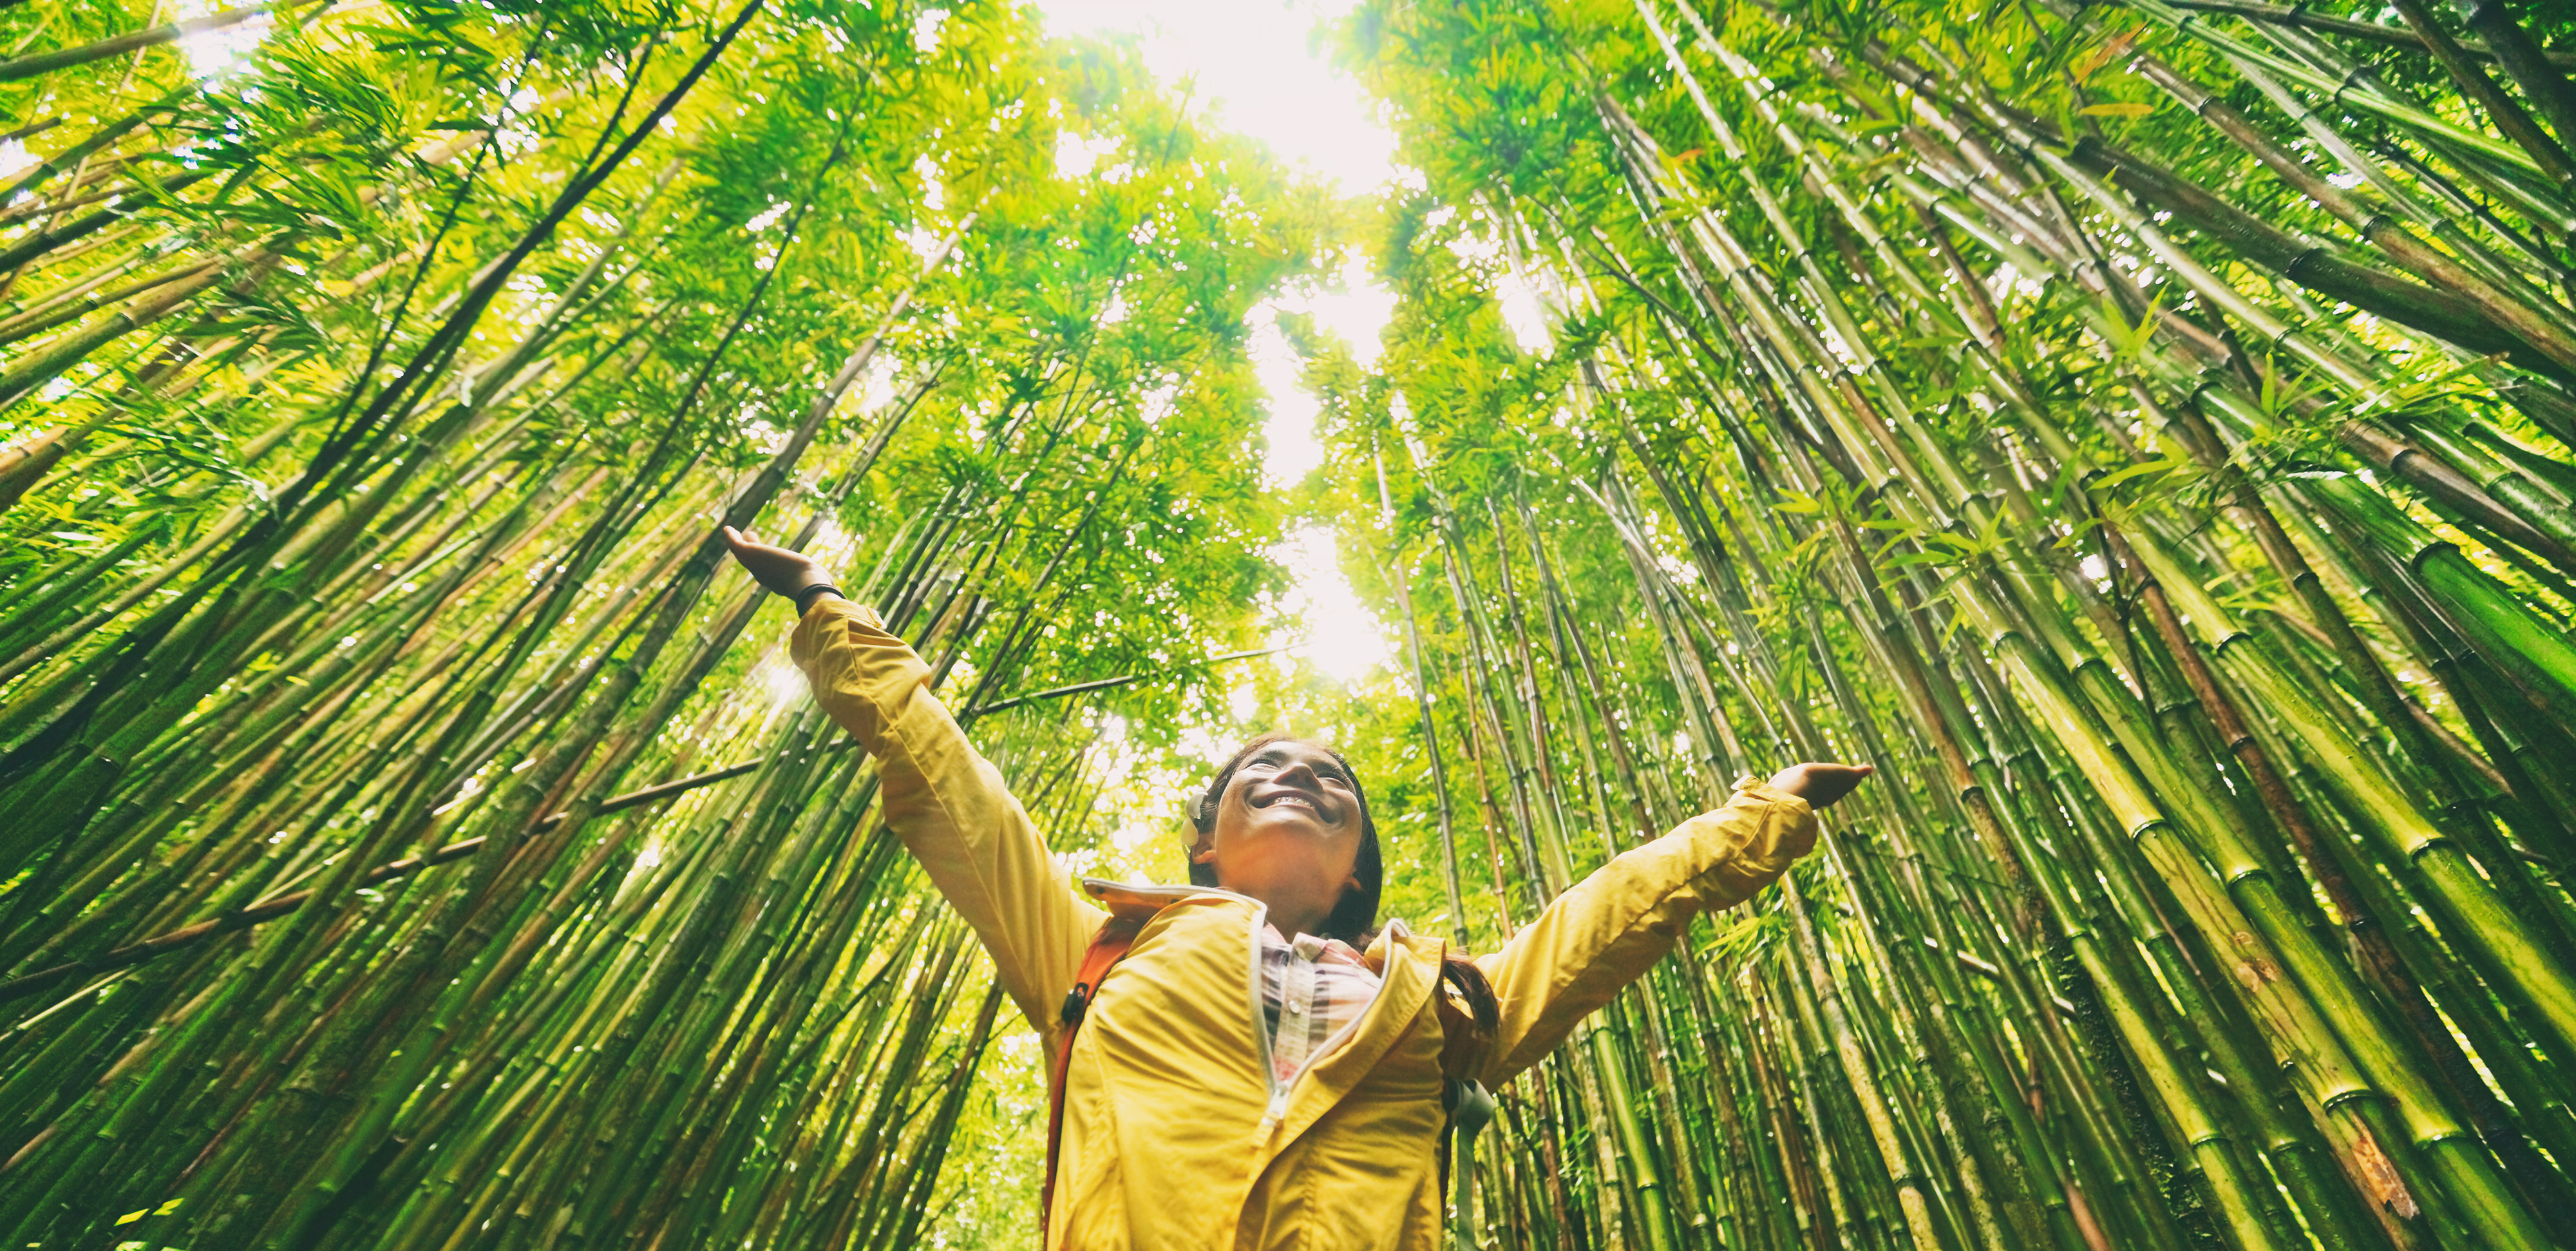 Photo of a woman in a yellow coat standing with her arms up in a green bamboo forest